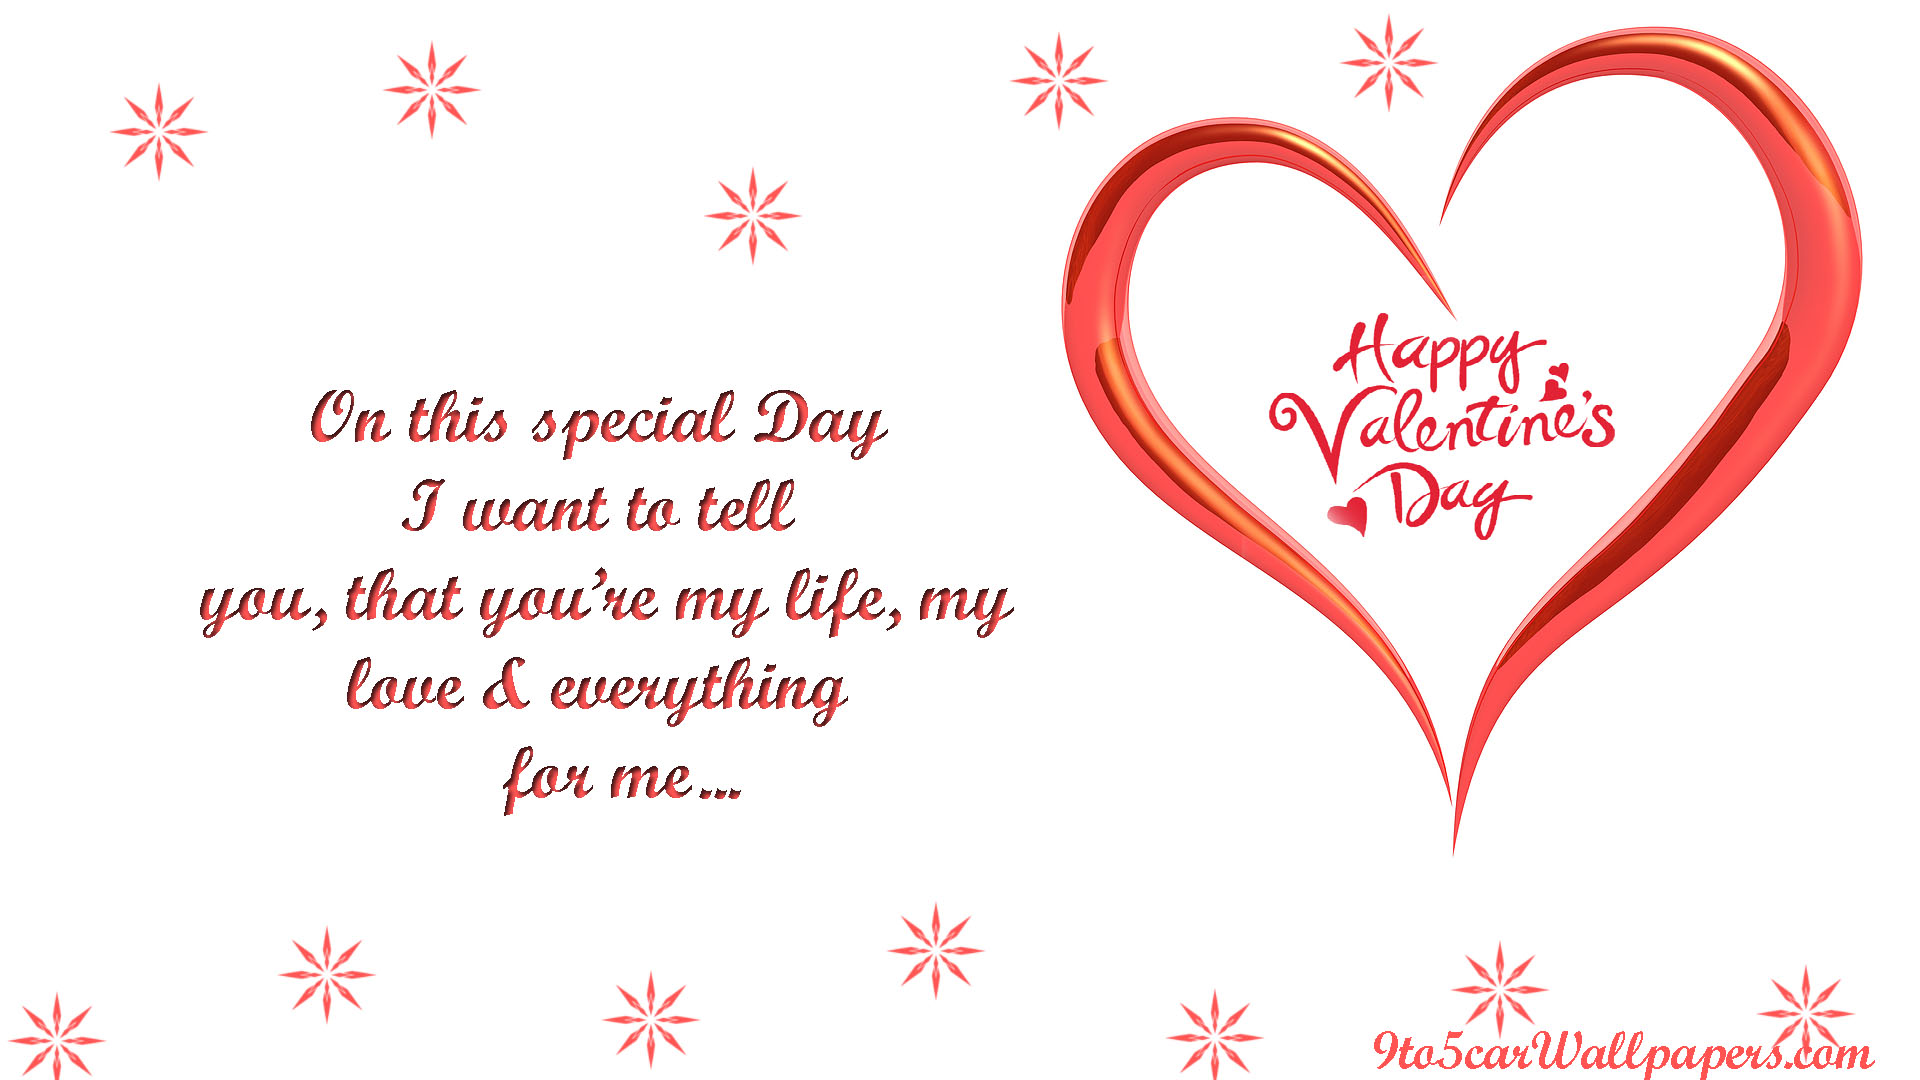 valentines-day-wishes-Auotes